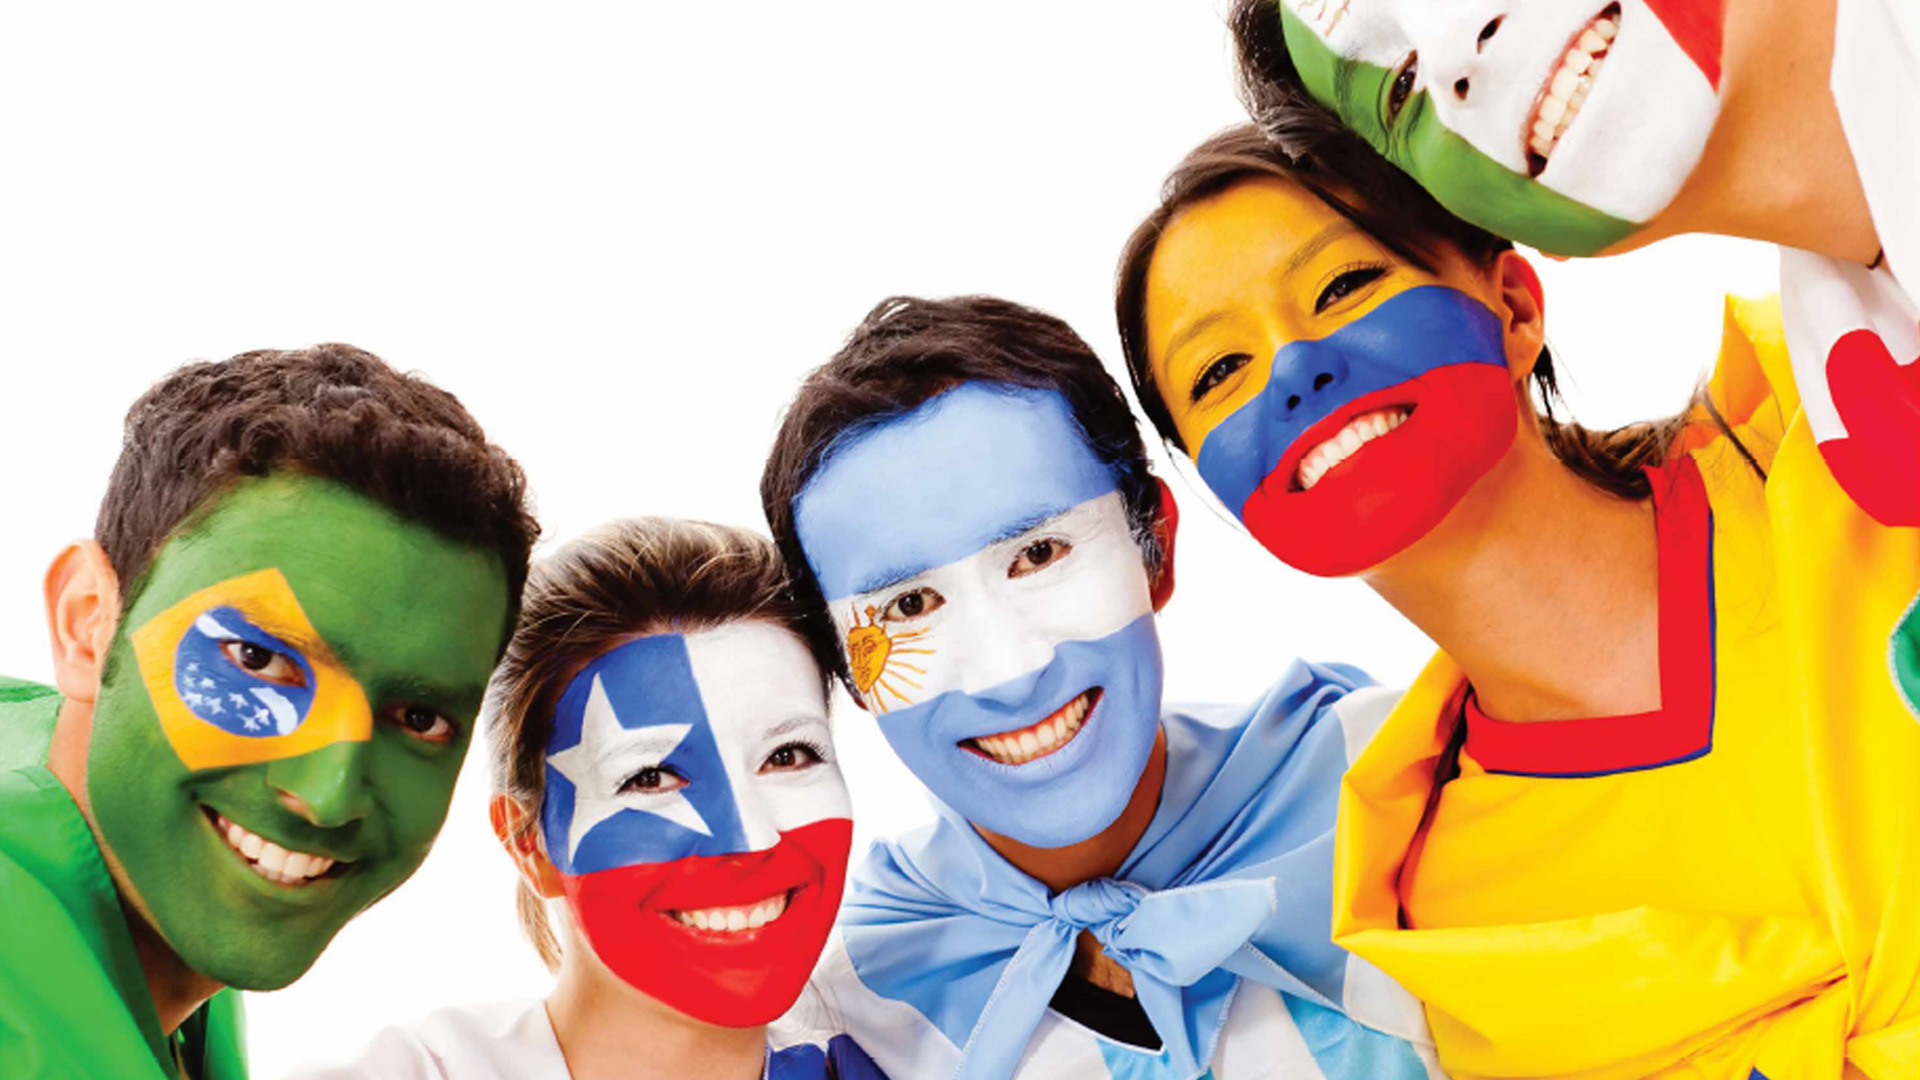 An image of five young people each wearing facepaint of the flags of different Latin American countries: Brazil, Chile, Argentina, Colombia, Mexico